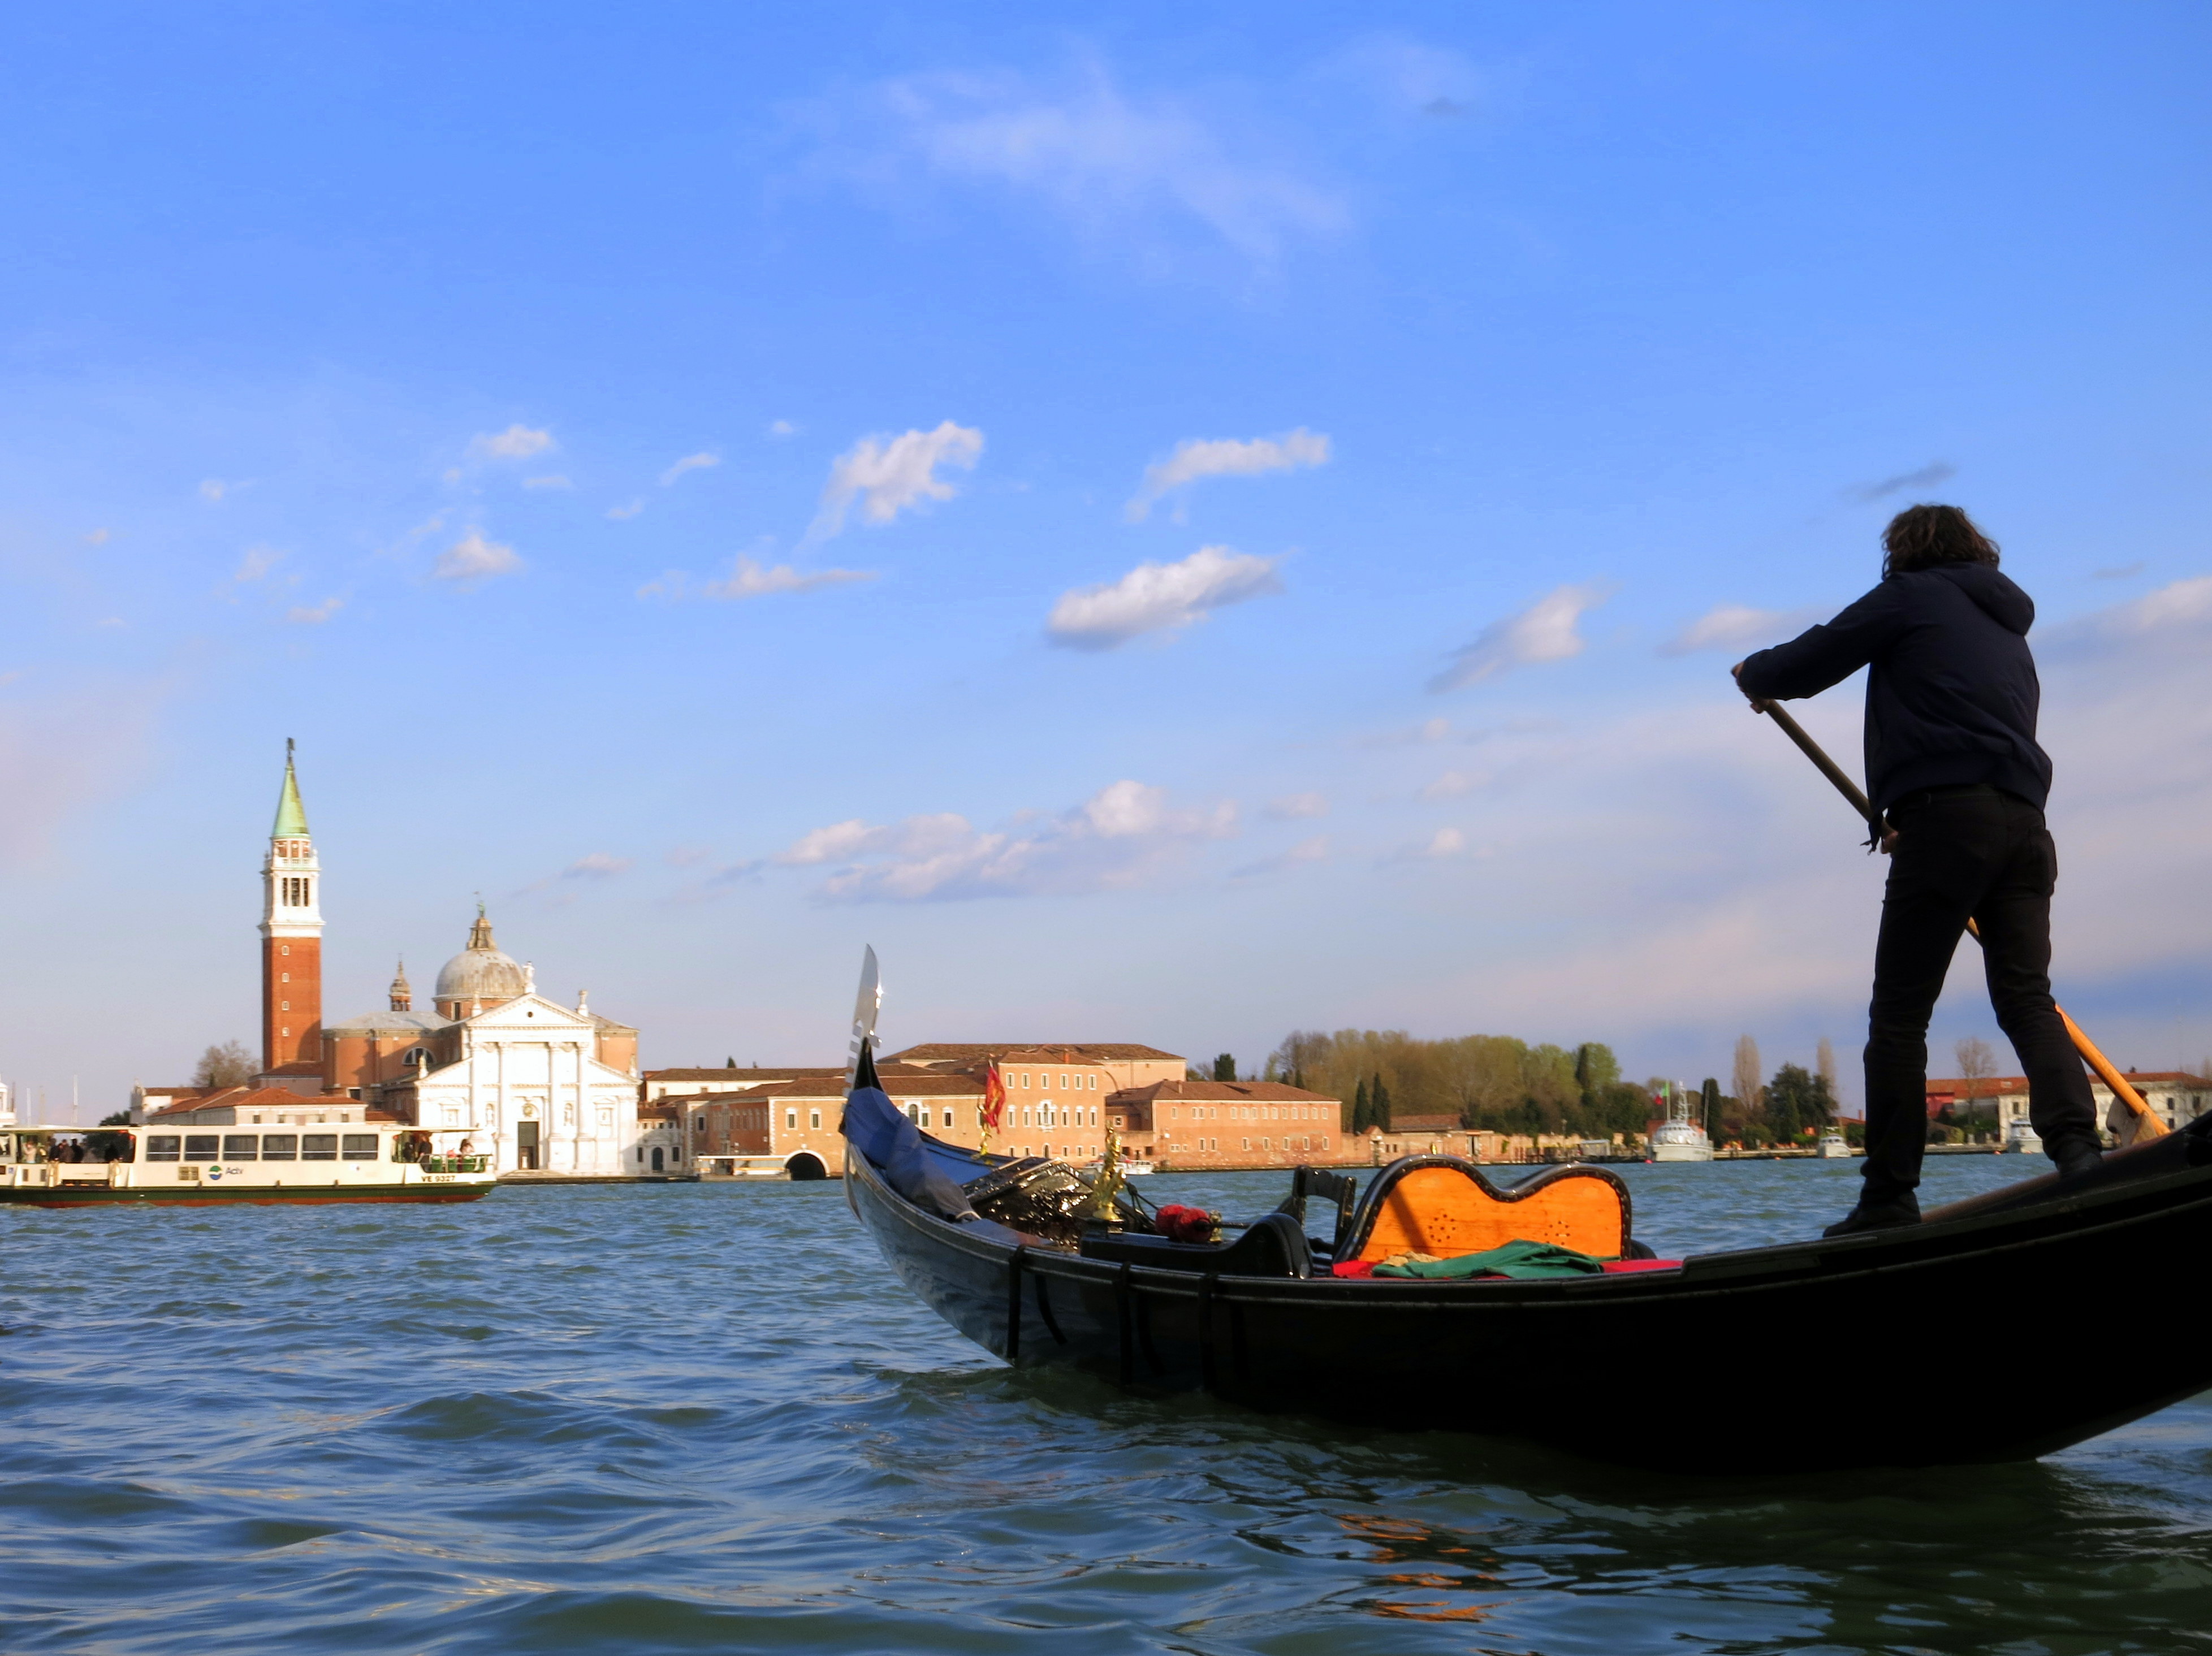 Gondolier with the wind: Venice, Italy